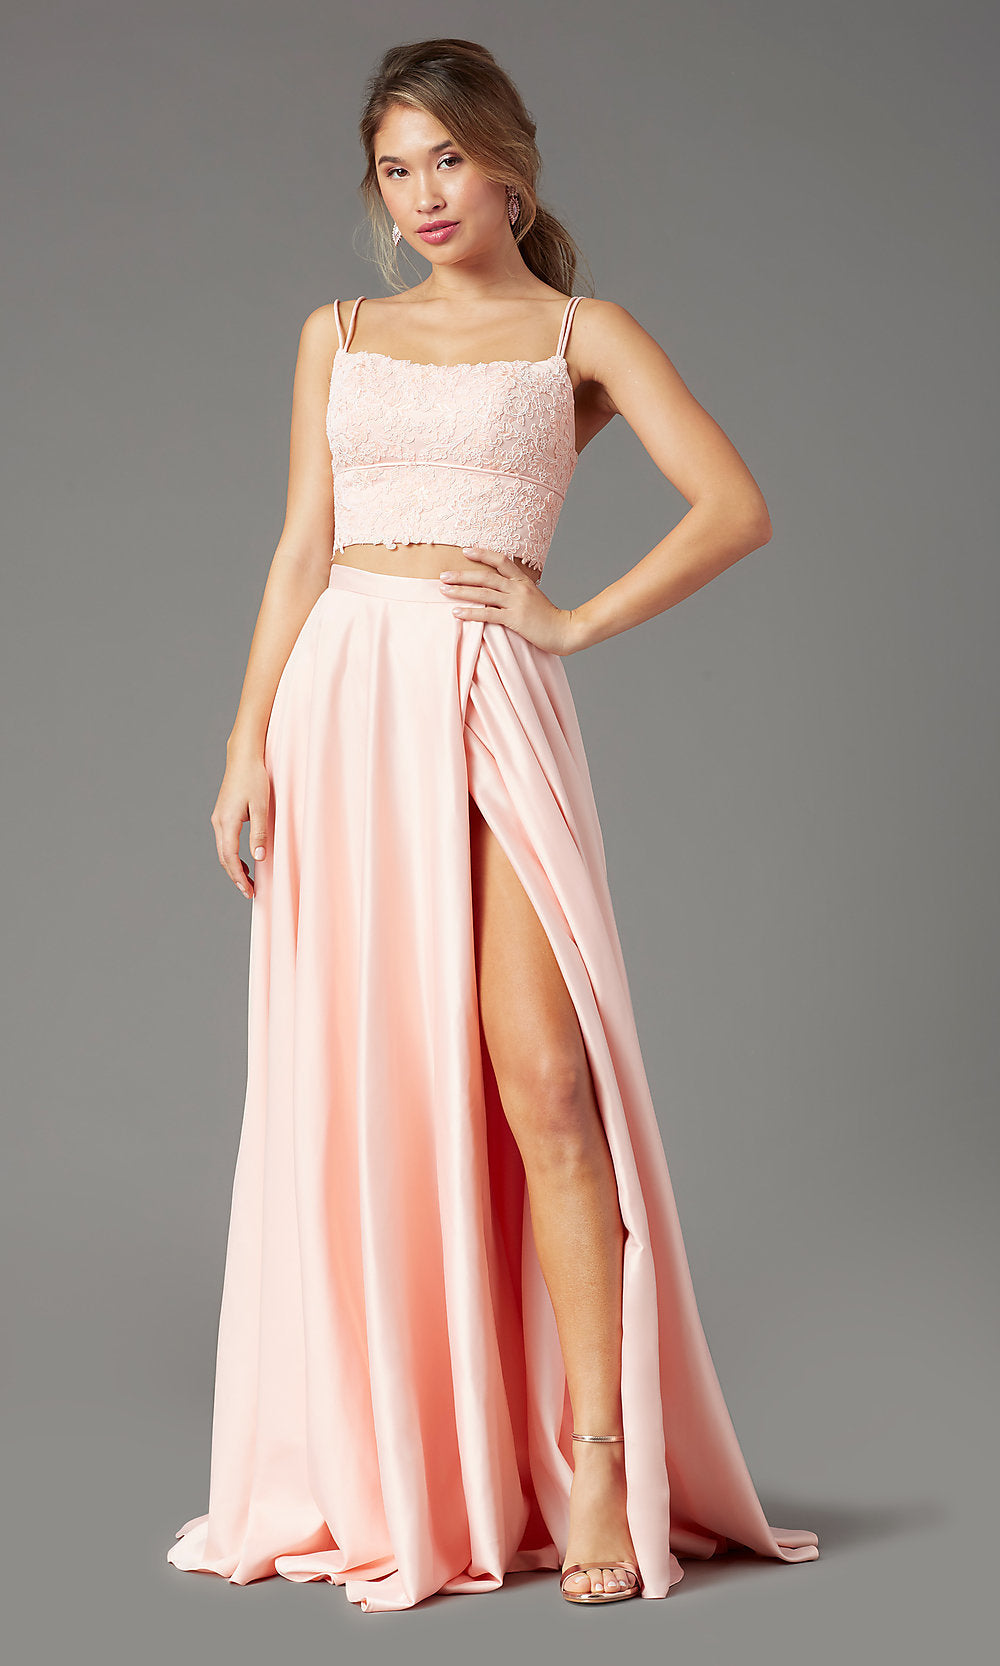 Bashful Satin Long Two-Piece Formal Prom Dress by PromGirl